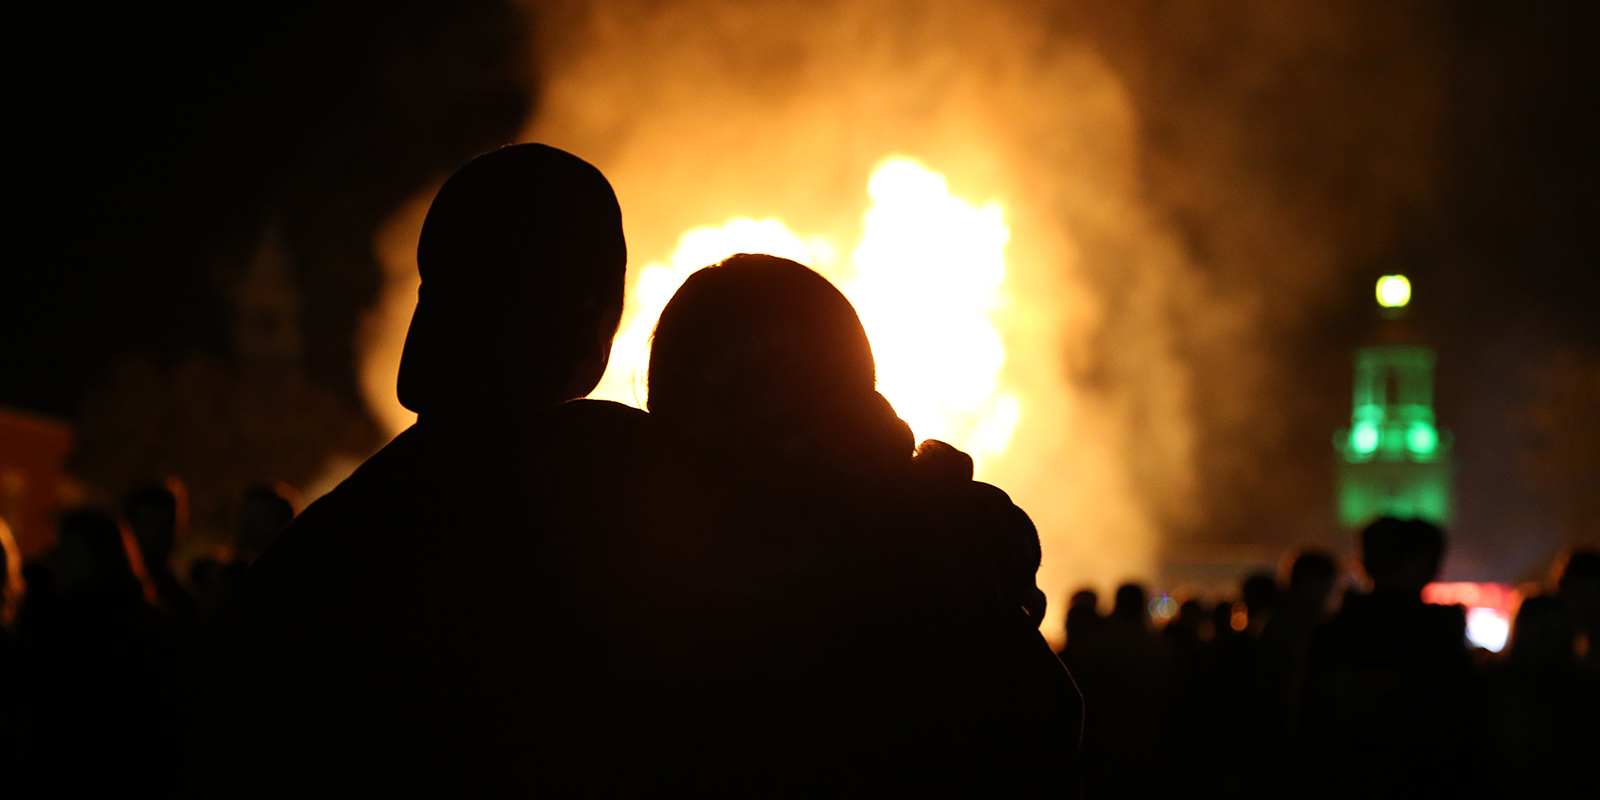 Silhouettes in front of the Homecoming bonfire